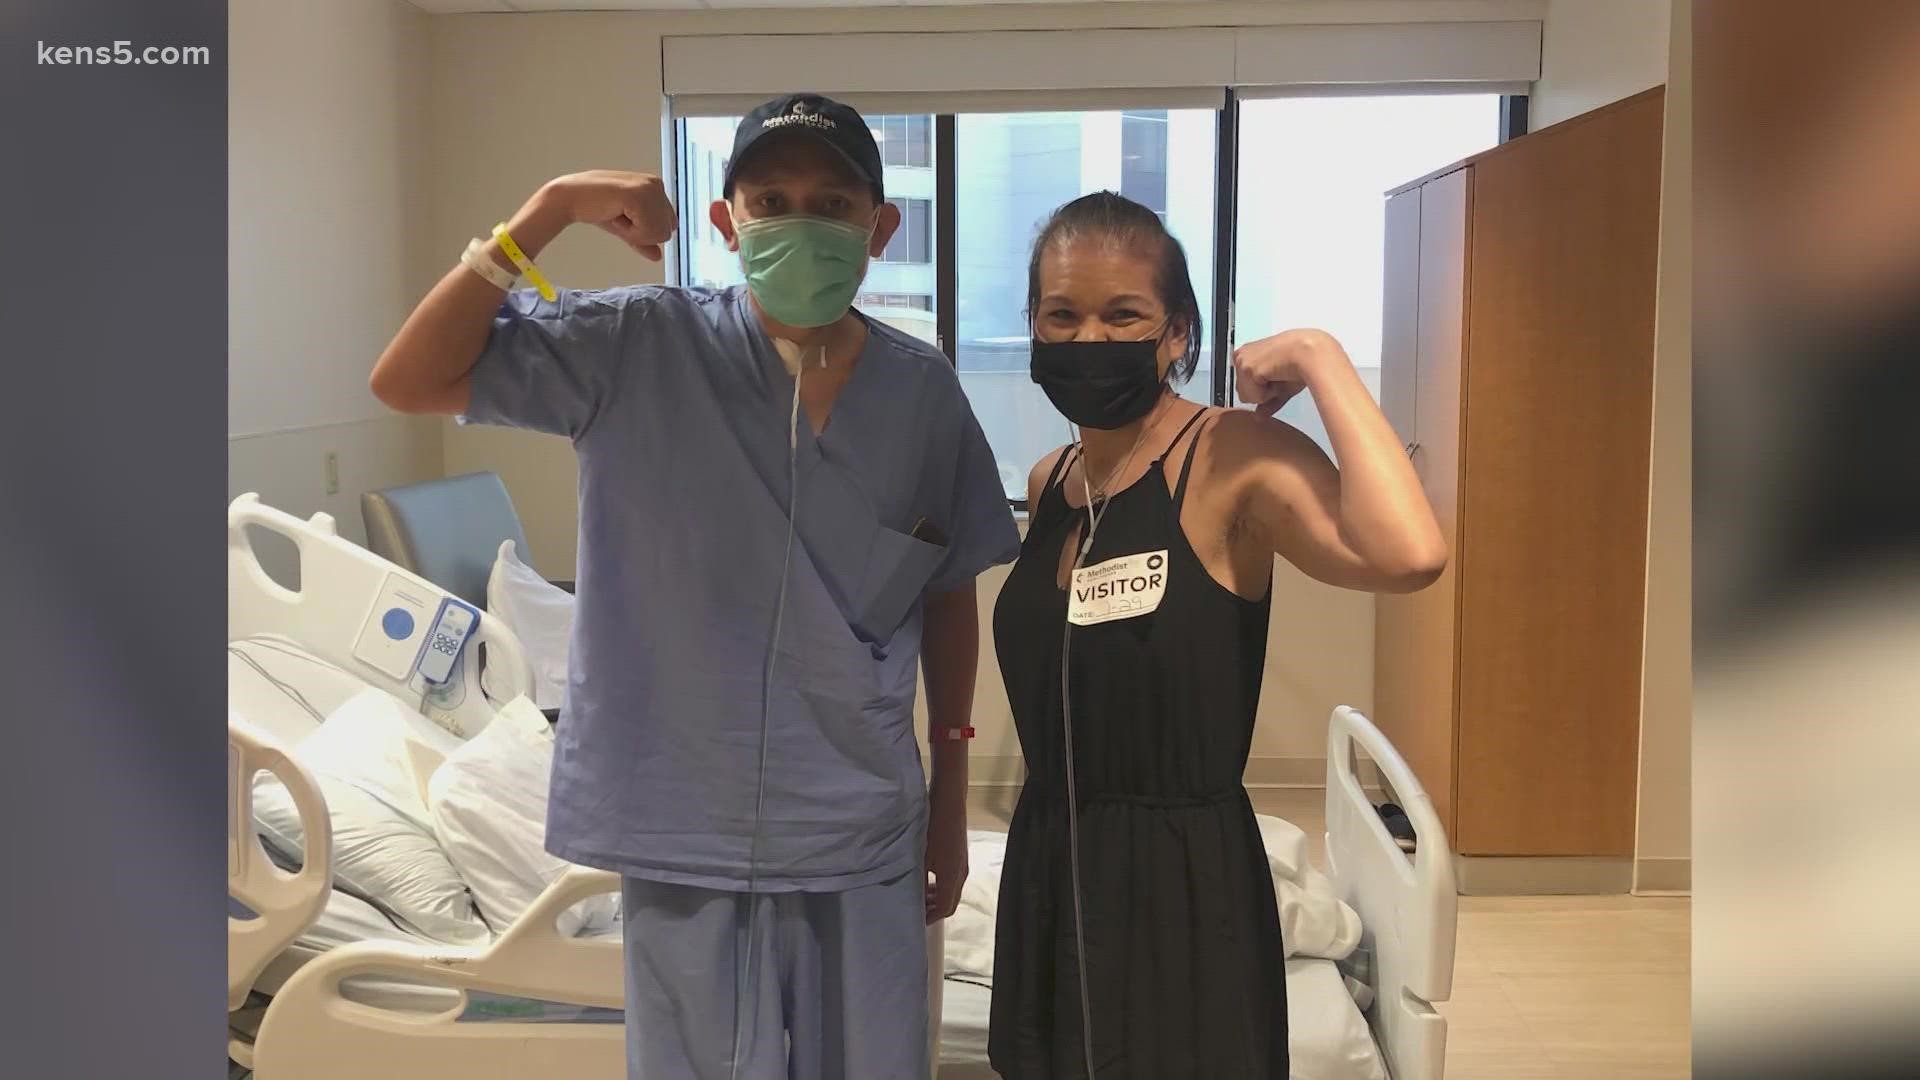 Two strangers found strength in each after fighting for their lives at Methodist Hospital.